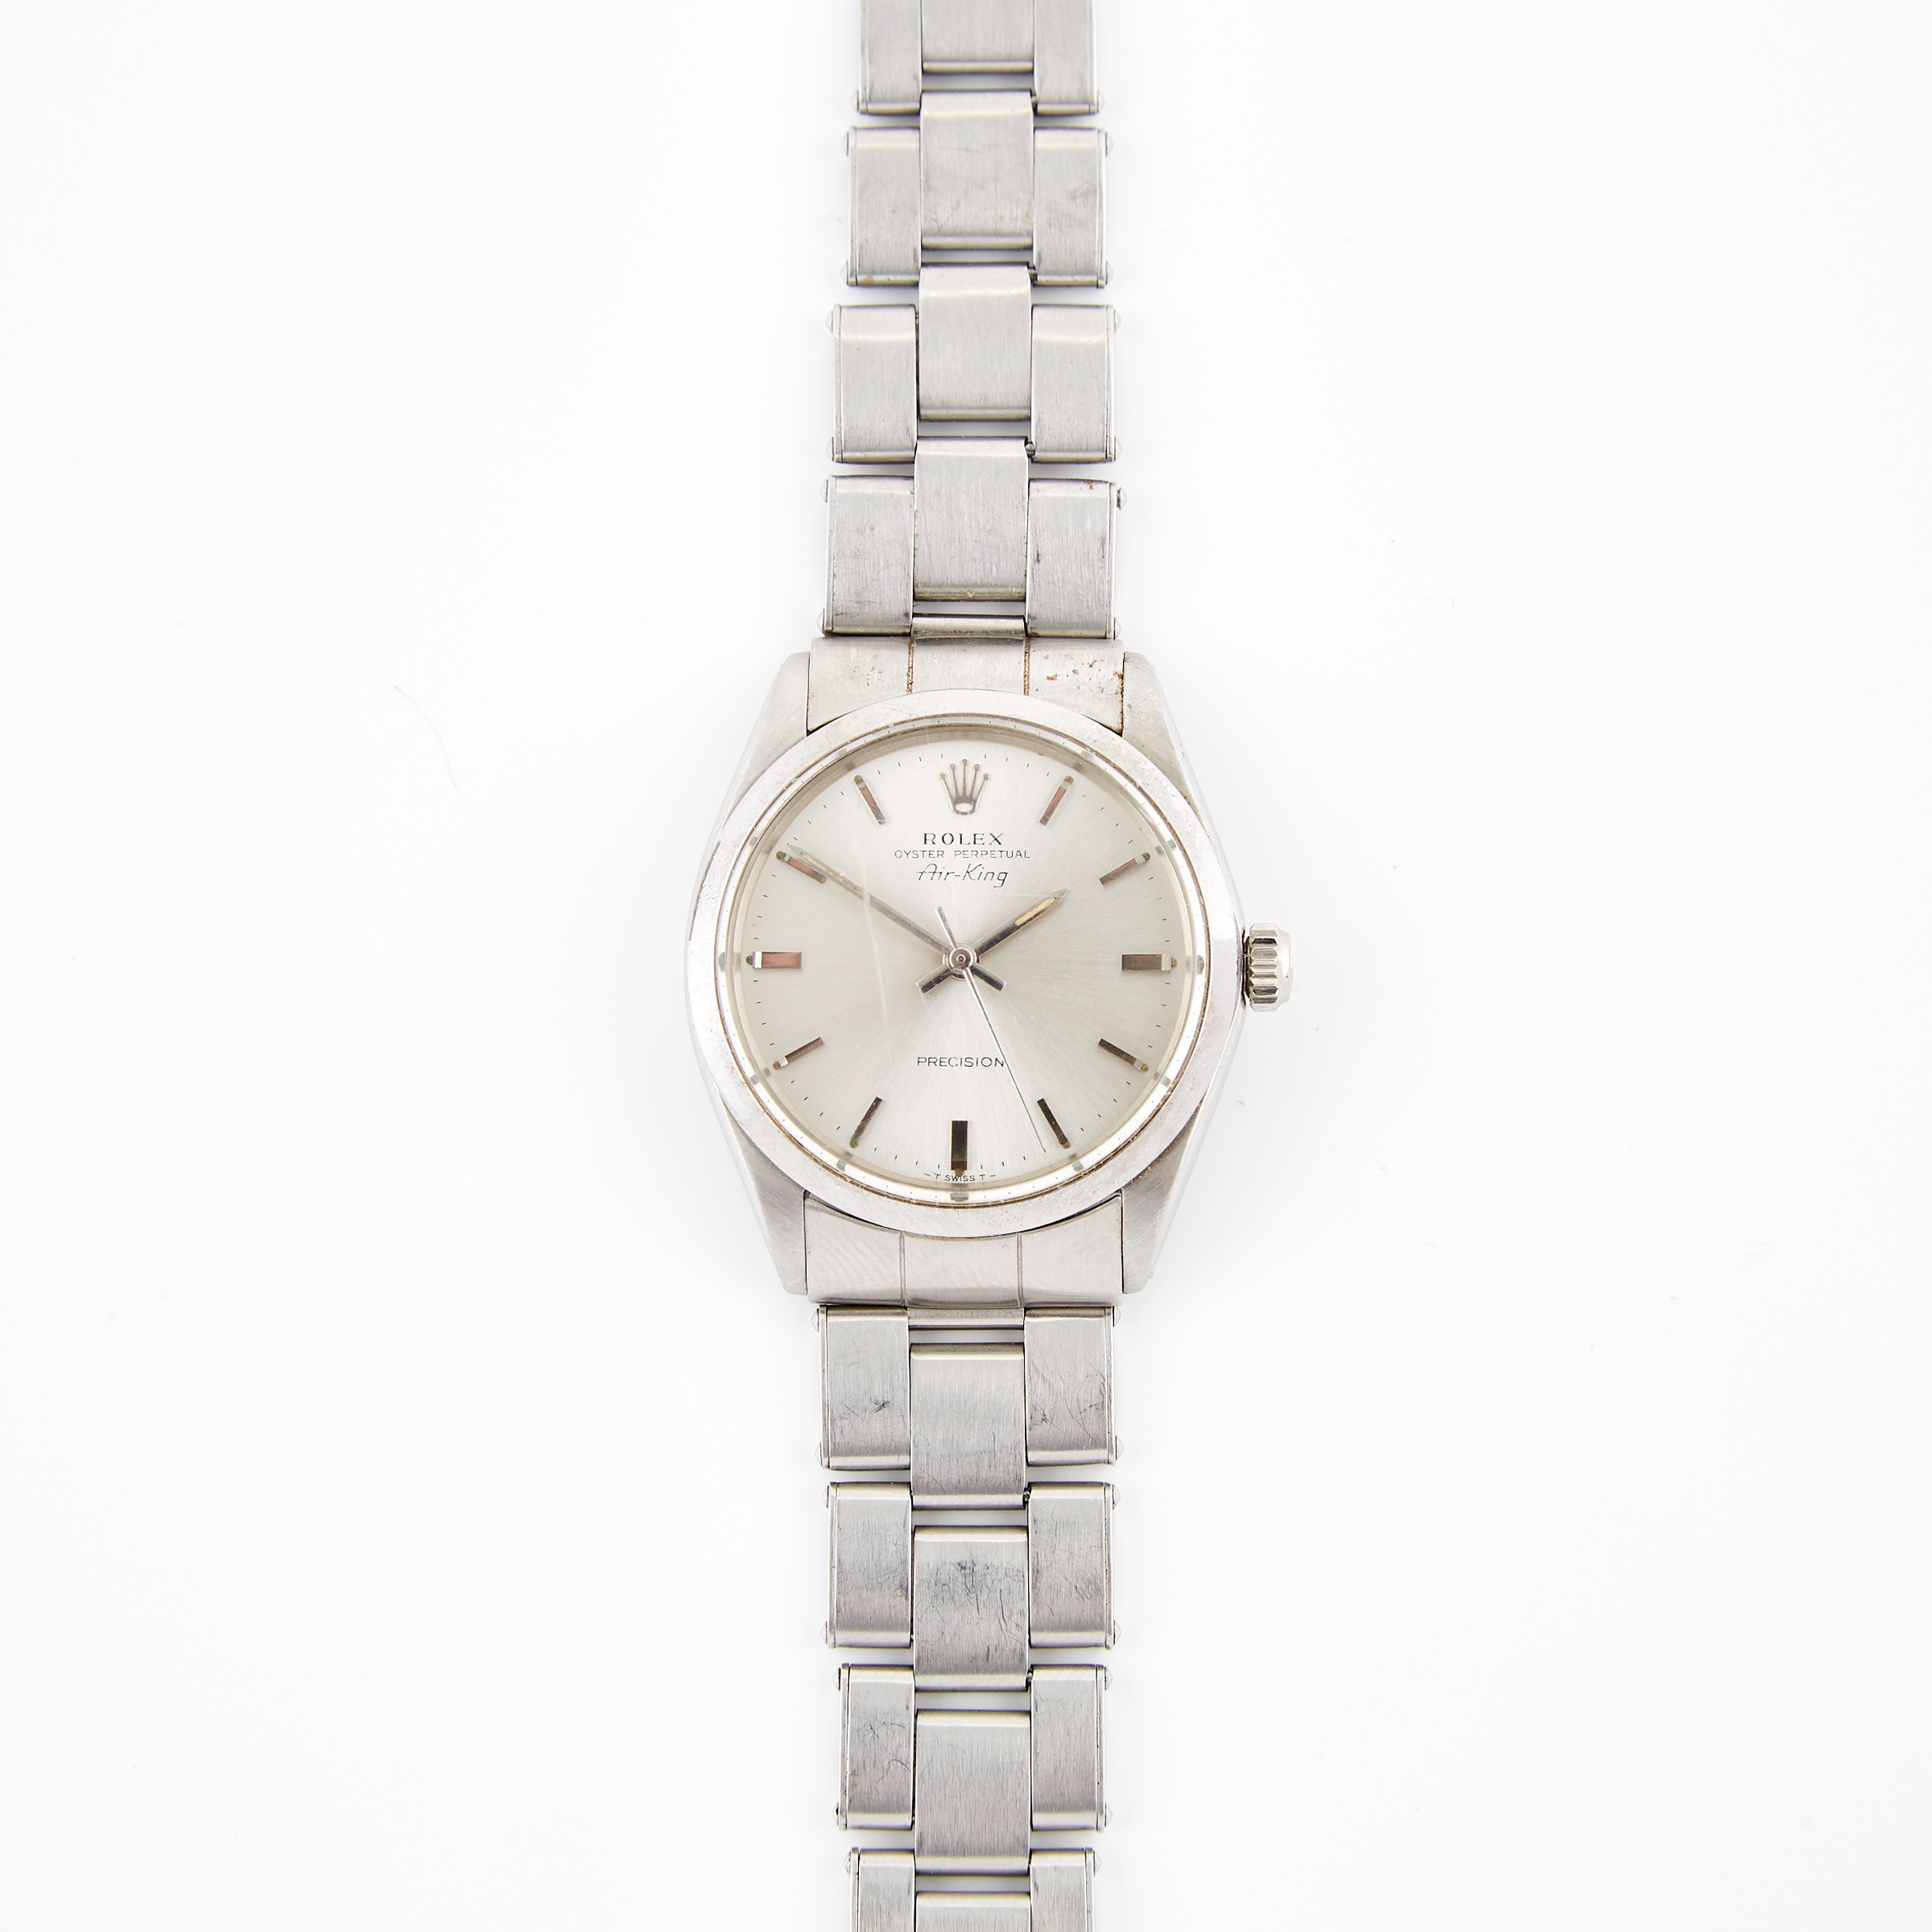 Rolex Oyster Perpetual Air-King Wristwatch